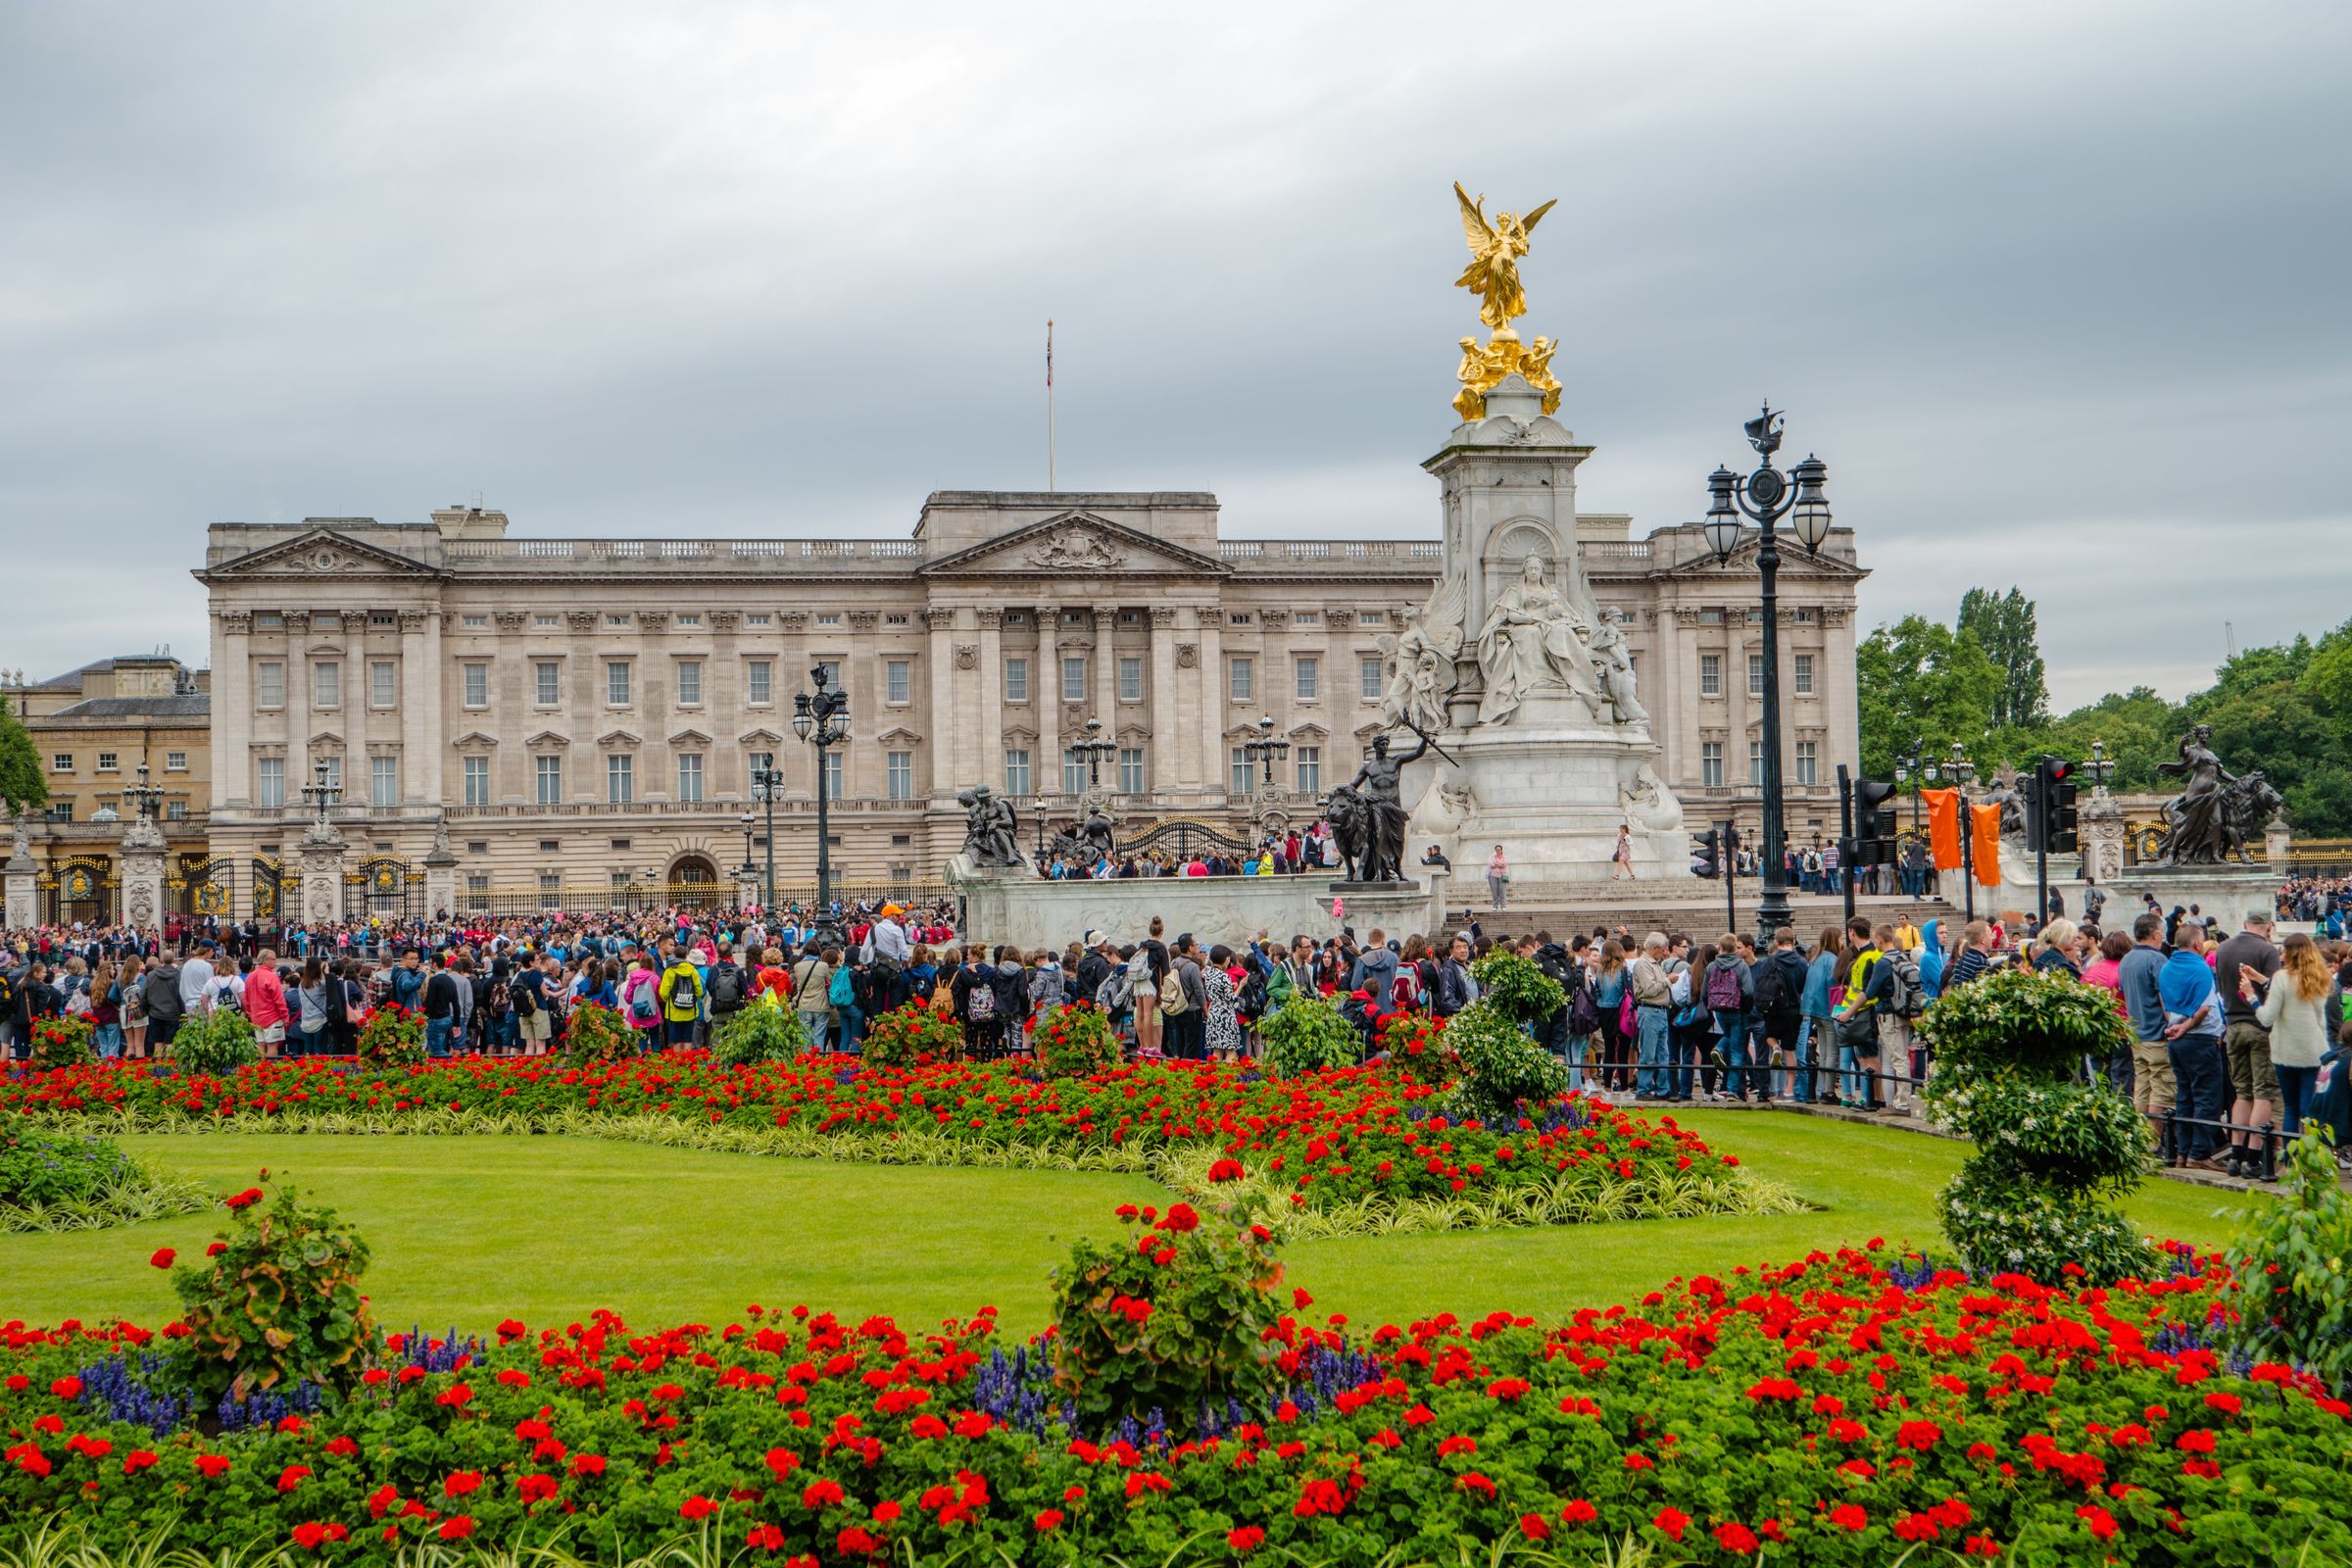 Crowds for Changing of the Guard at Buckingham Palace